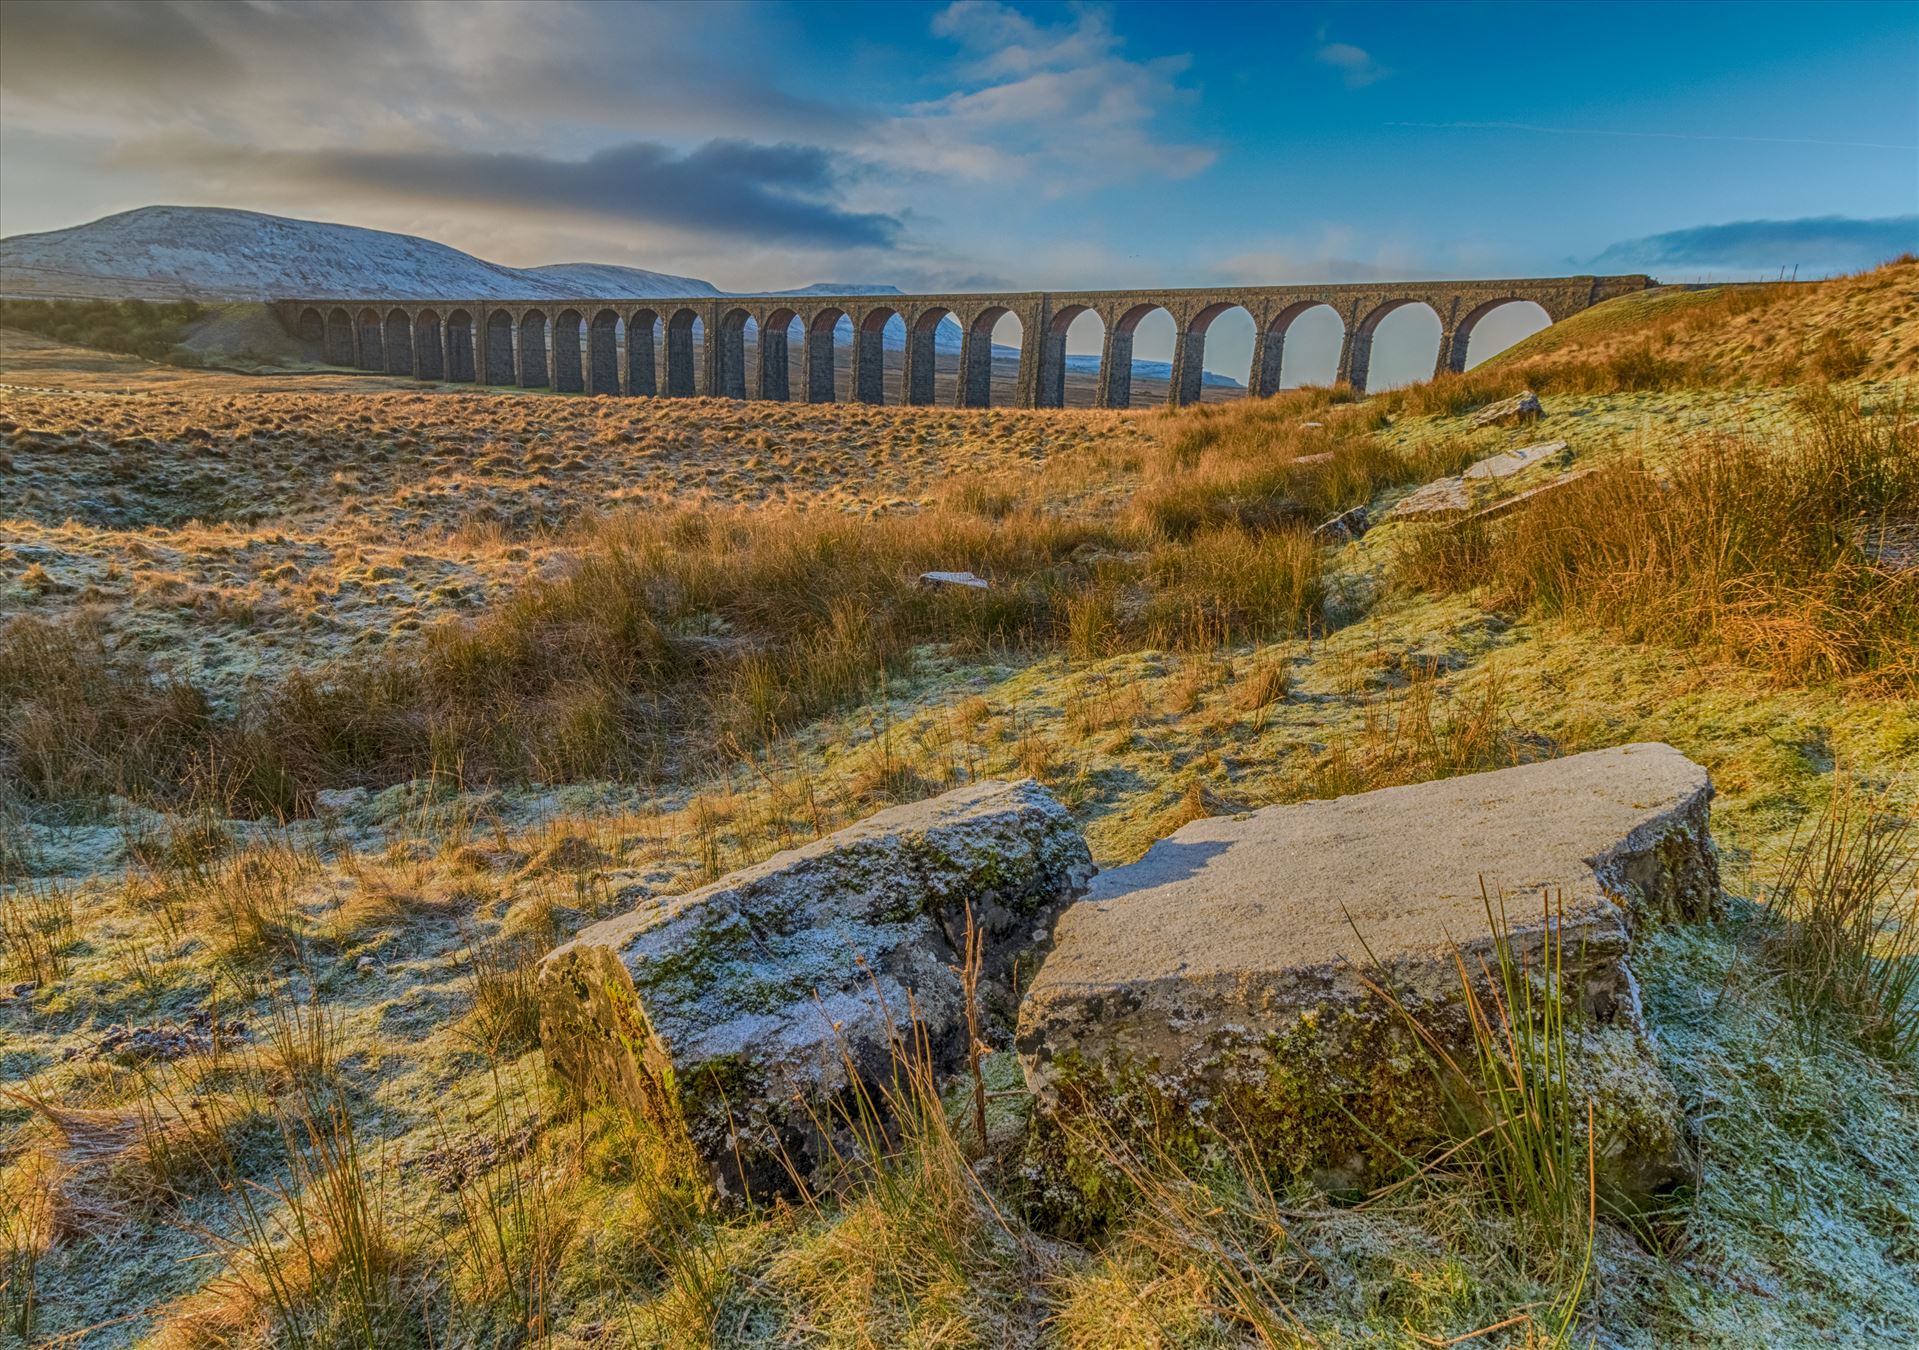 Ribblehead Viaduct 2 Sunrise at Ribblehead Viaduct in the Yorkshire Dales. Part of the Settle to Carlisle railway with Ingleborough in the background. by Tony Keogh Photography